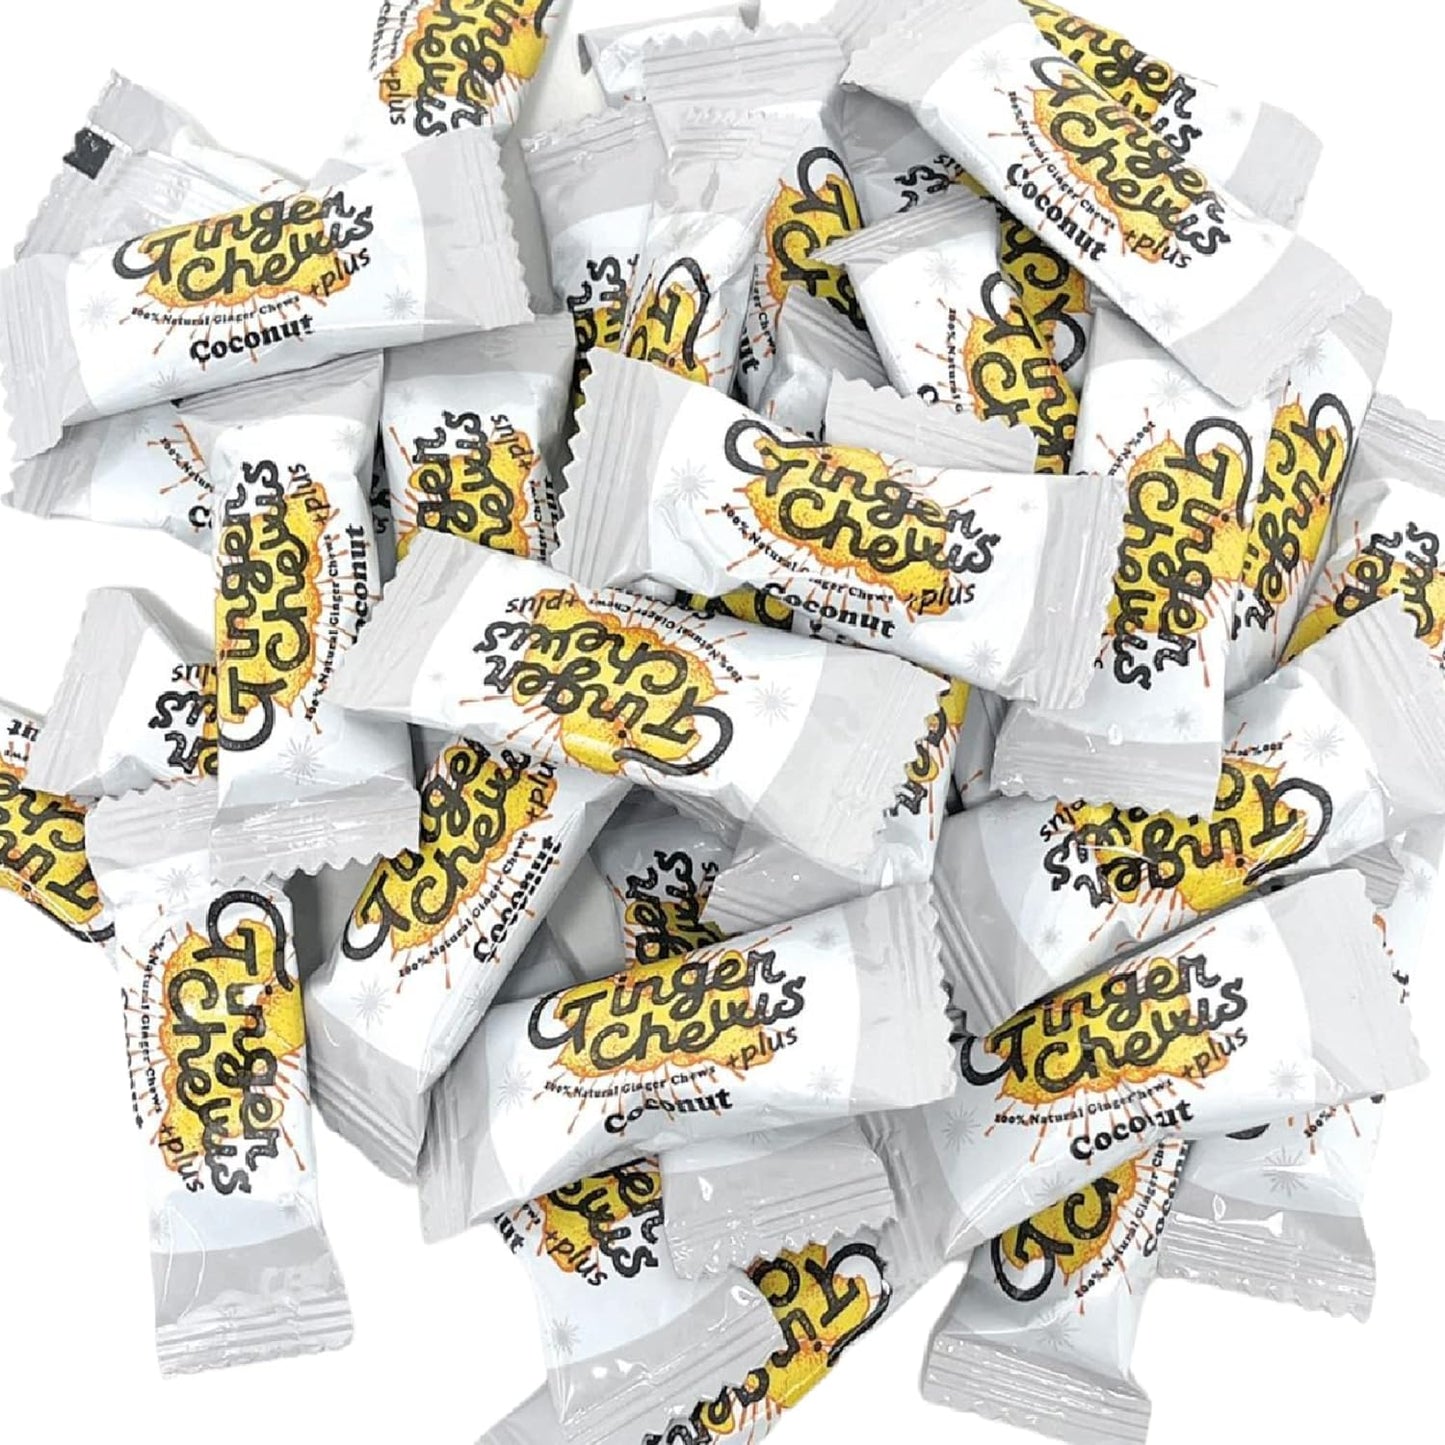 Fusion Select Original Ginger Chews - Sweet Soft Candied Delights From Indonesia - Promotes Relief From Morning Sickness, Upset Stomach - Made from Real Ginger Root, Non-GMO, Vegan Candy - Premium Ginger from Concordia Style Boutique - Just $13.98! Shop now at Concordia Style Boutique